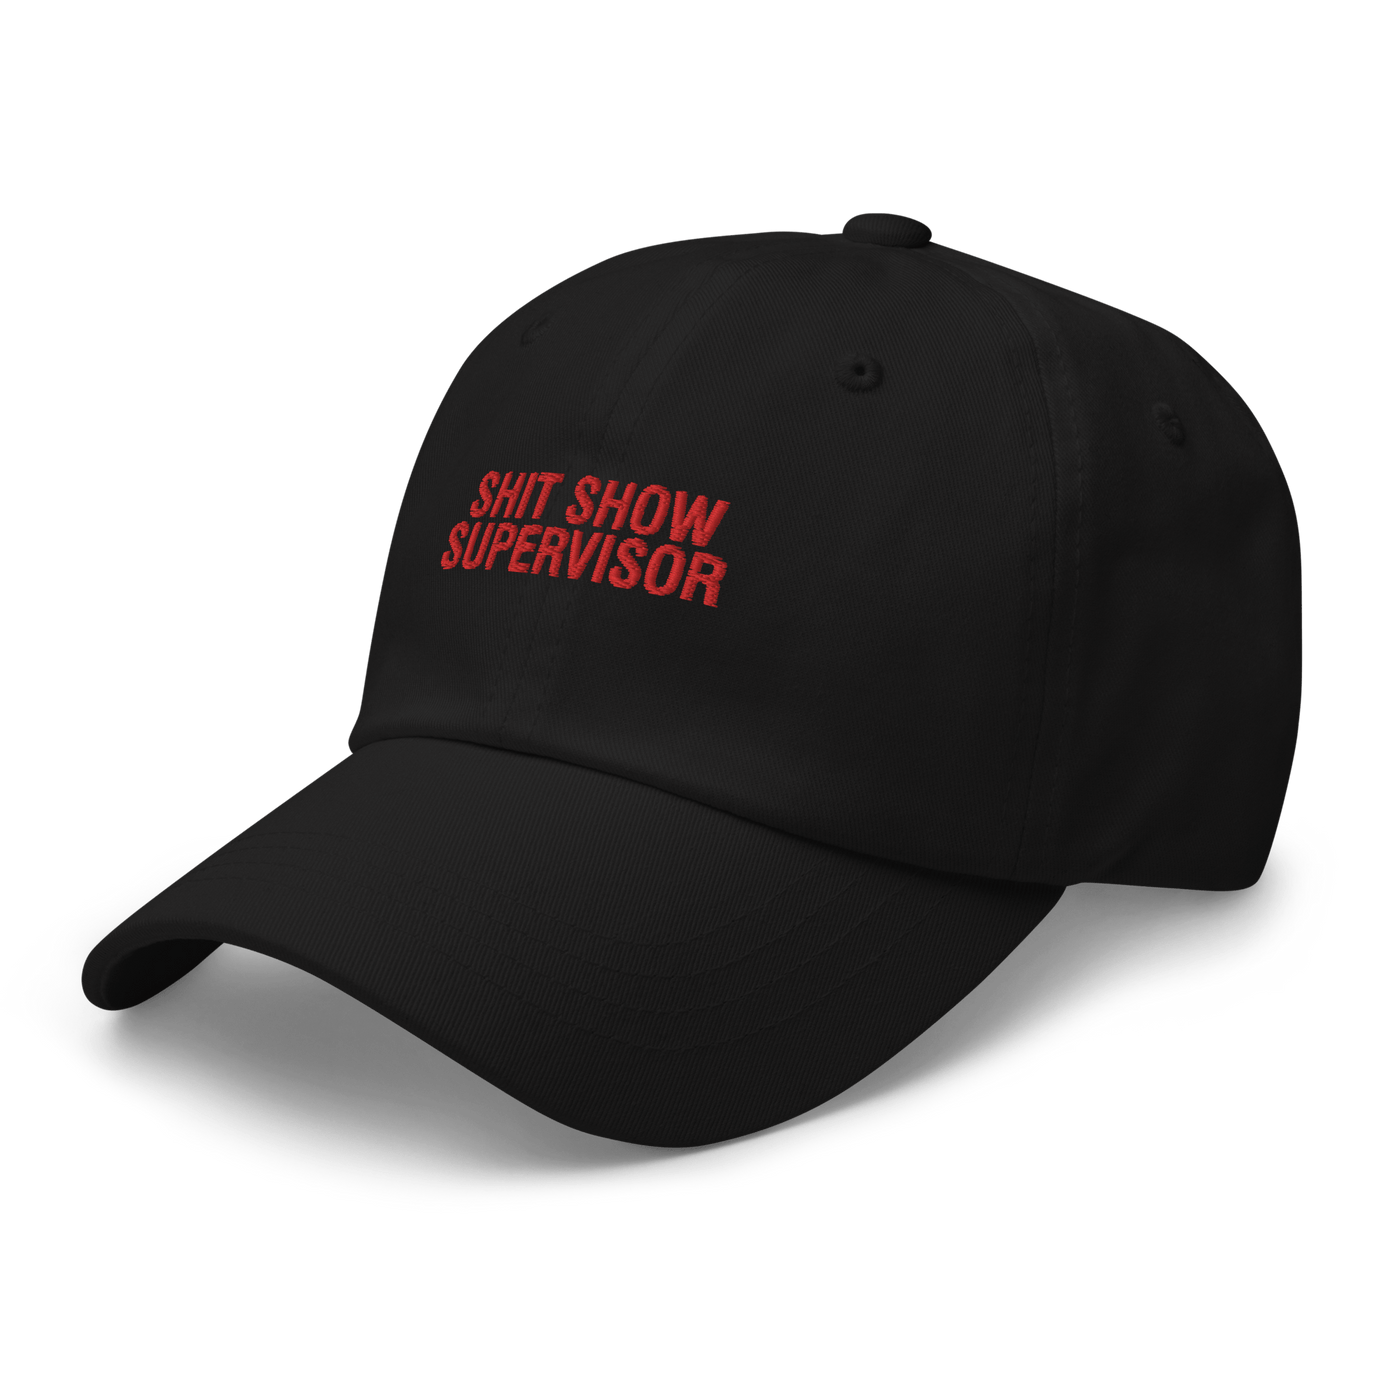 Shit Show Supervisor Dad hat - Black - Just Another Cap Store